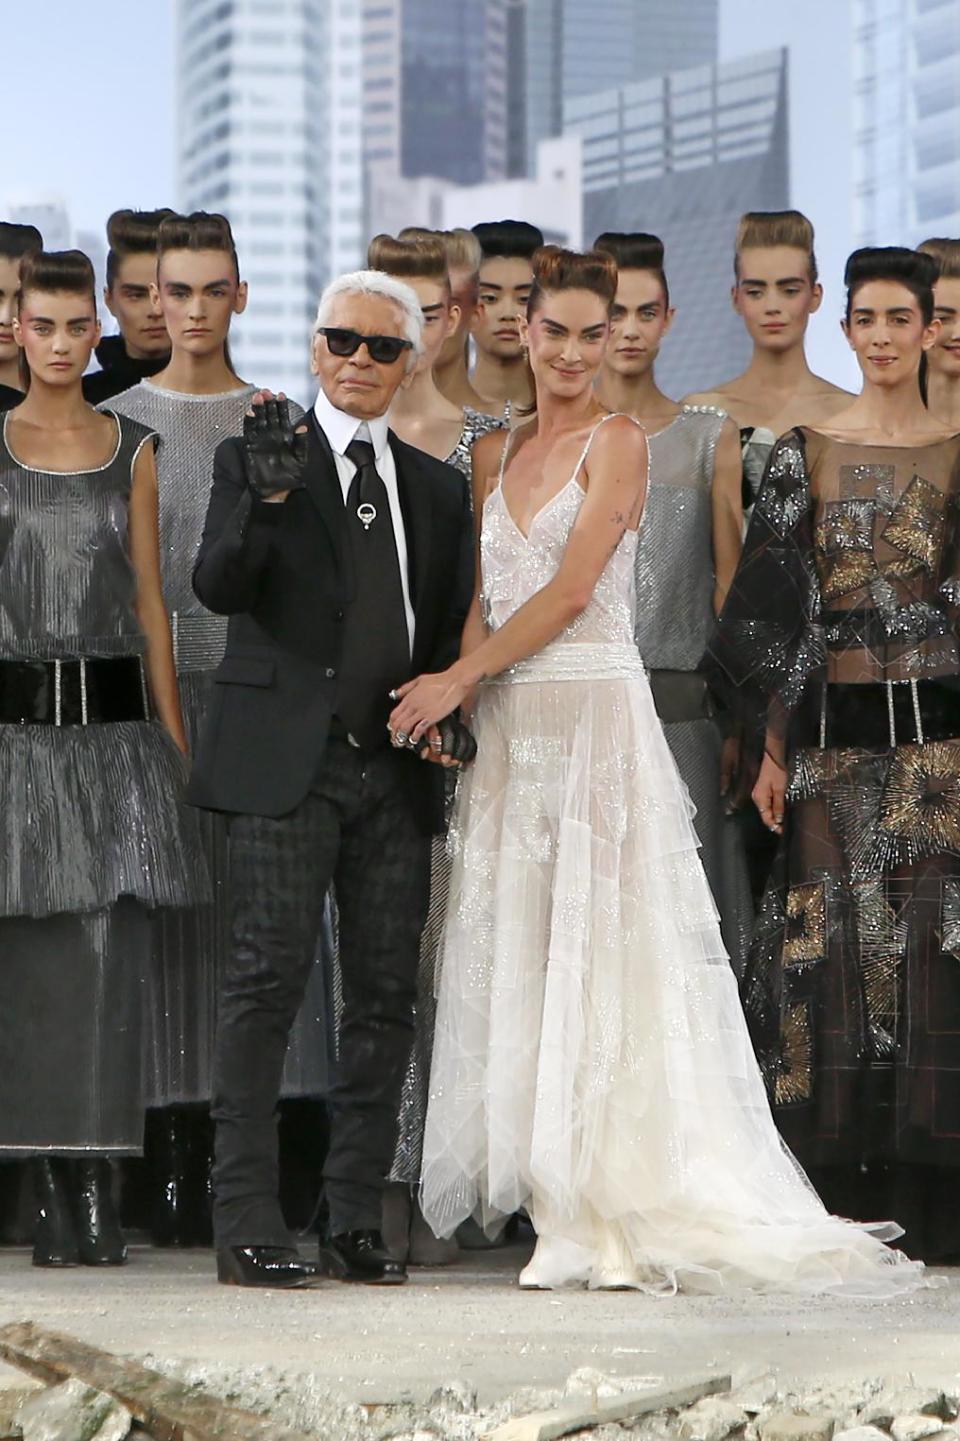 German fashion designer Karl Lagerfeld, foreground centre left, surrounded by models, acknowledges applause following the presentation of the Haute Couture Fall-Winter 2013-2014 collection he designed for Chanel, Tuesday, July 2, 2013 in Paris. (AP Photo/Francois Mori)